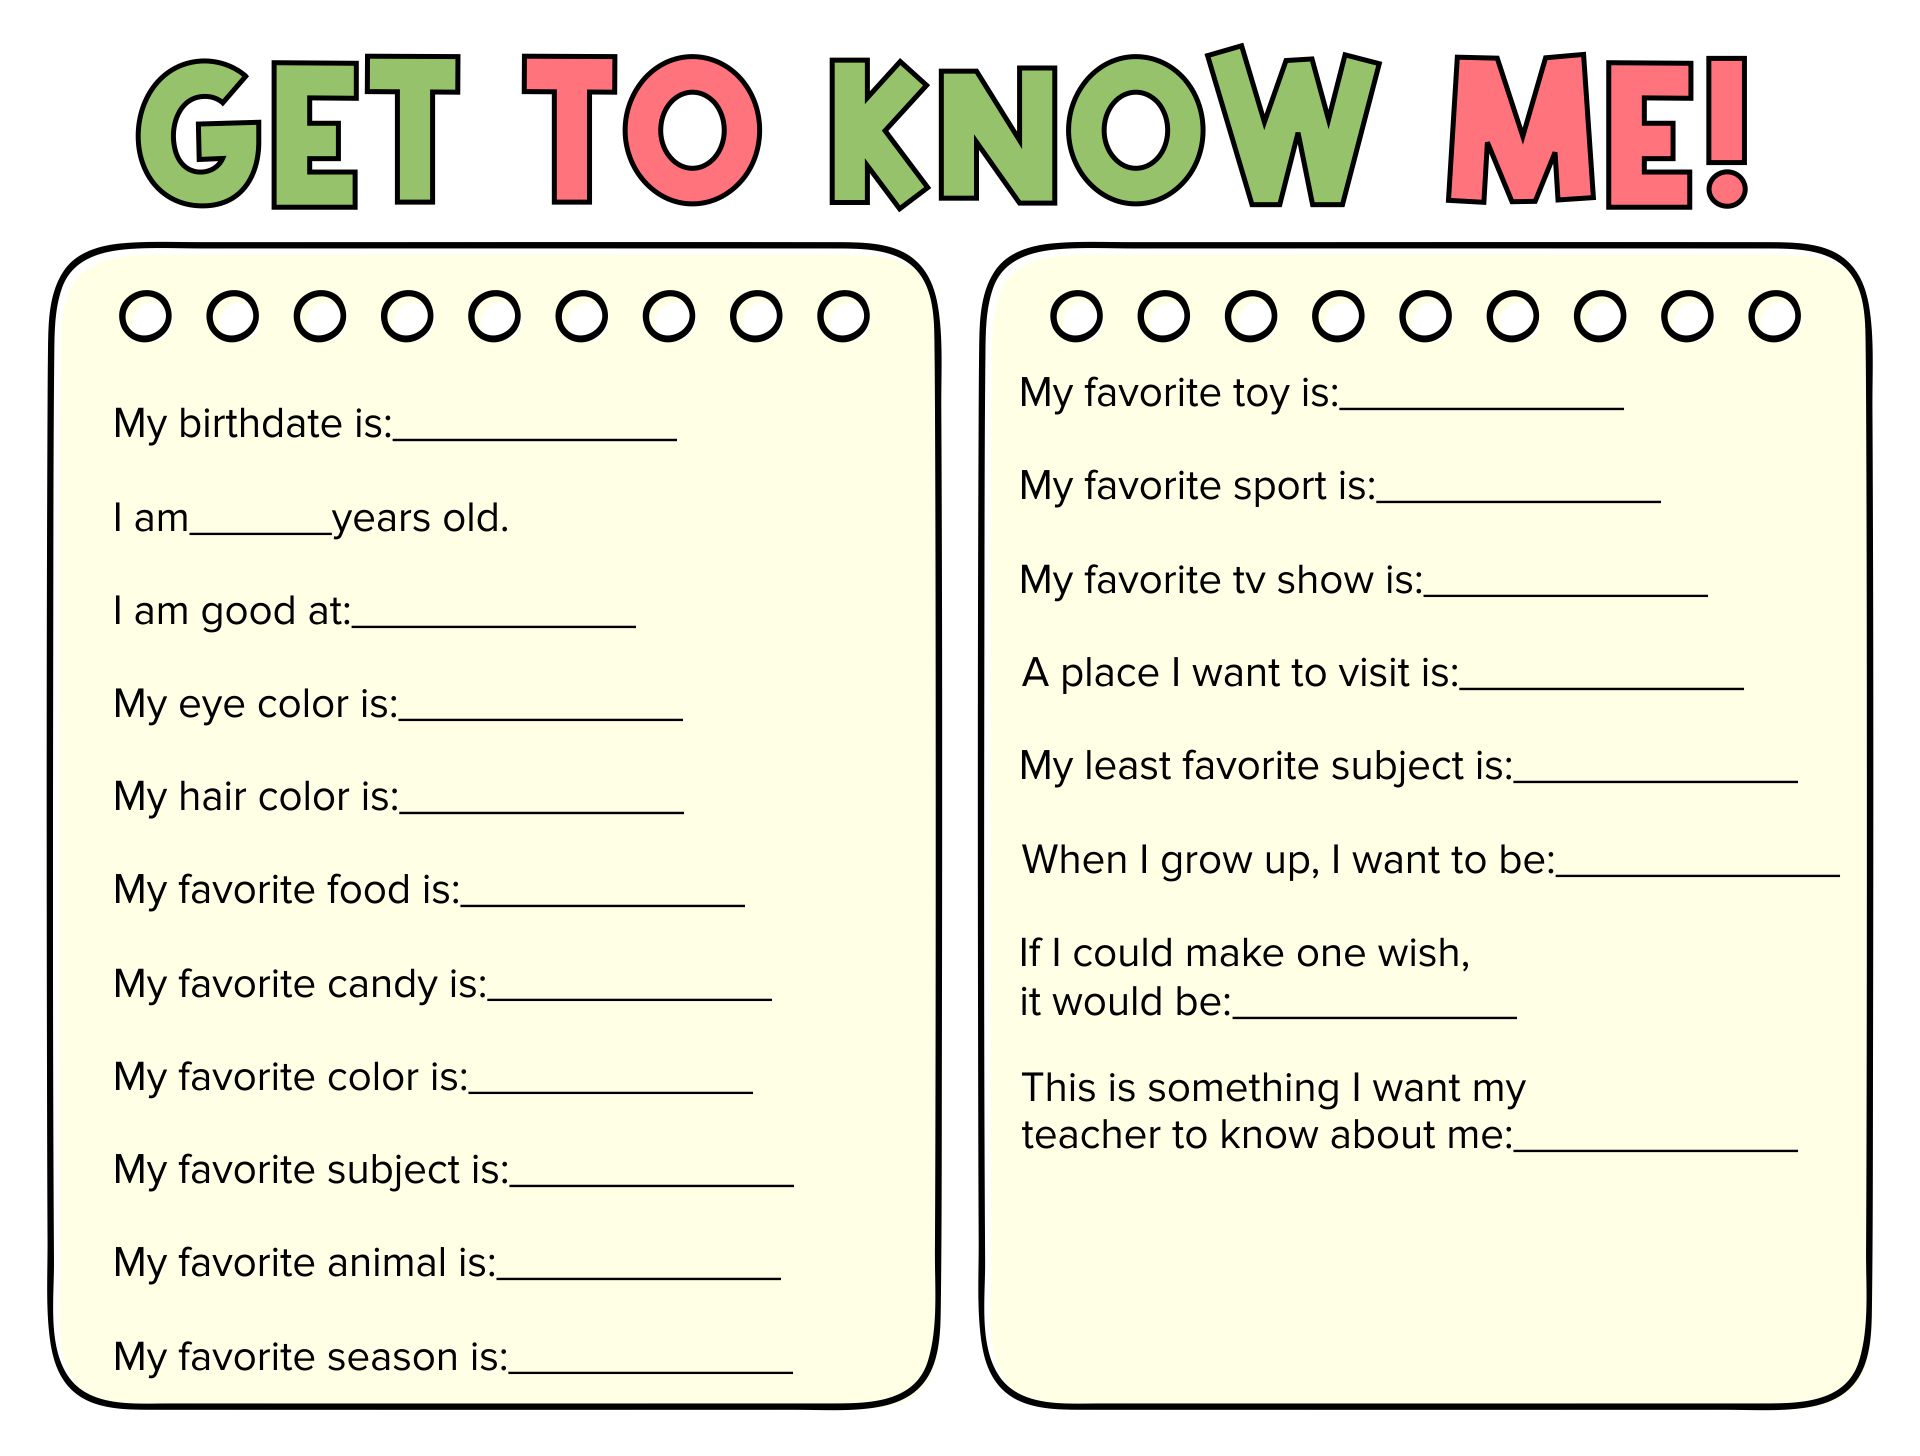 Printable Get To Know Me Questions Worksheets